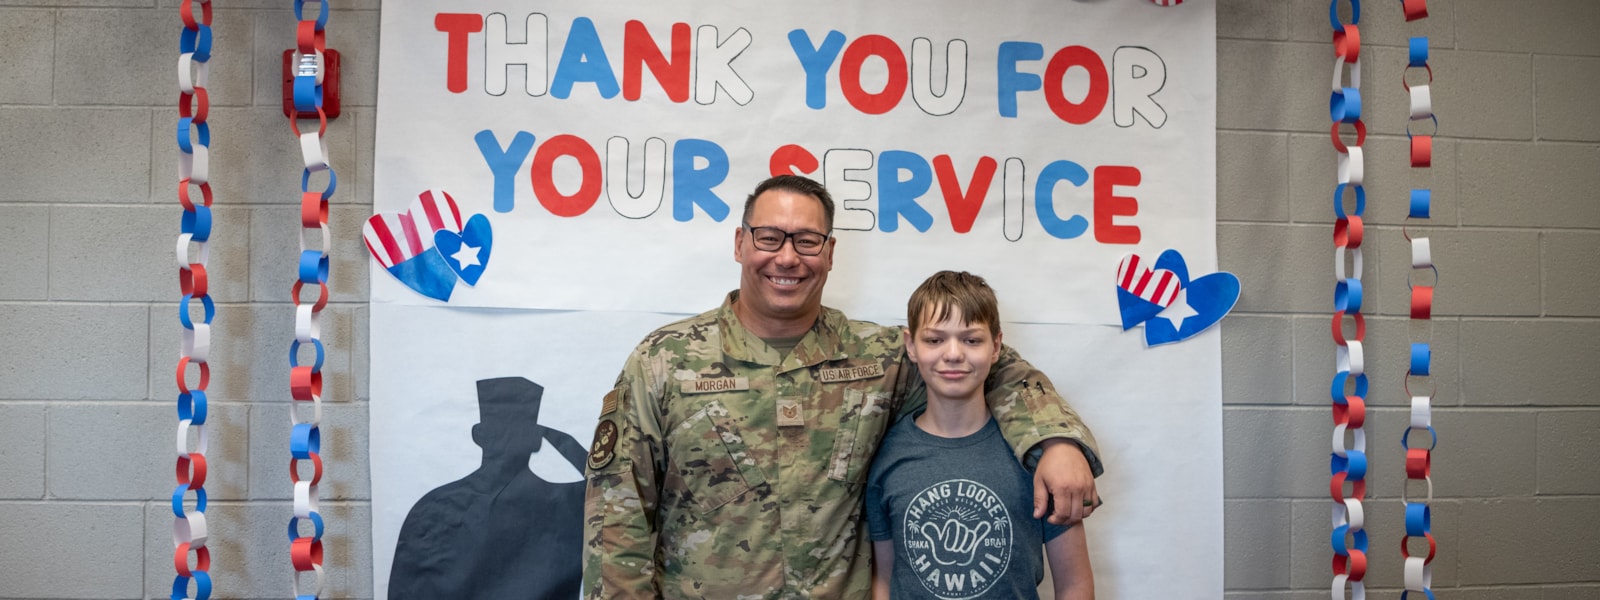 Thank you for your service and a pic of a boy and his dad